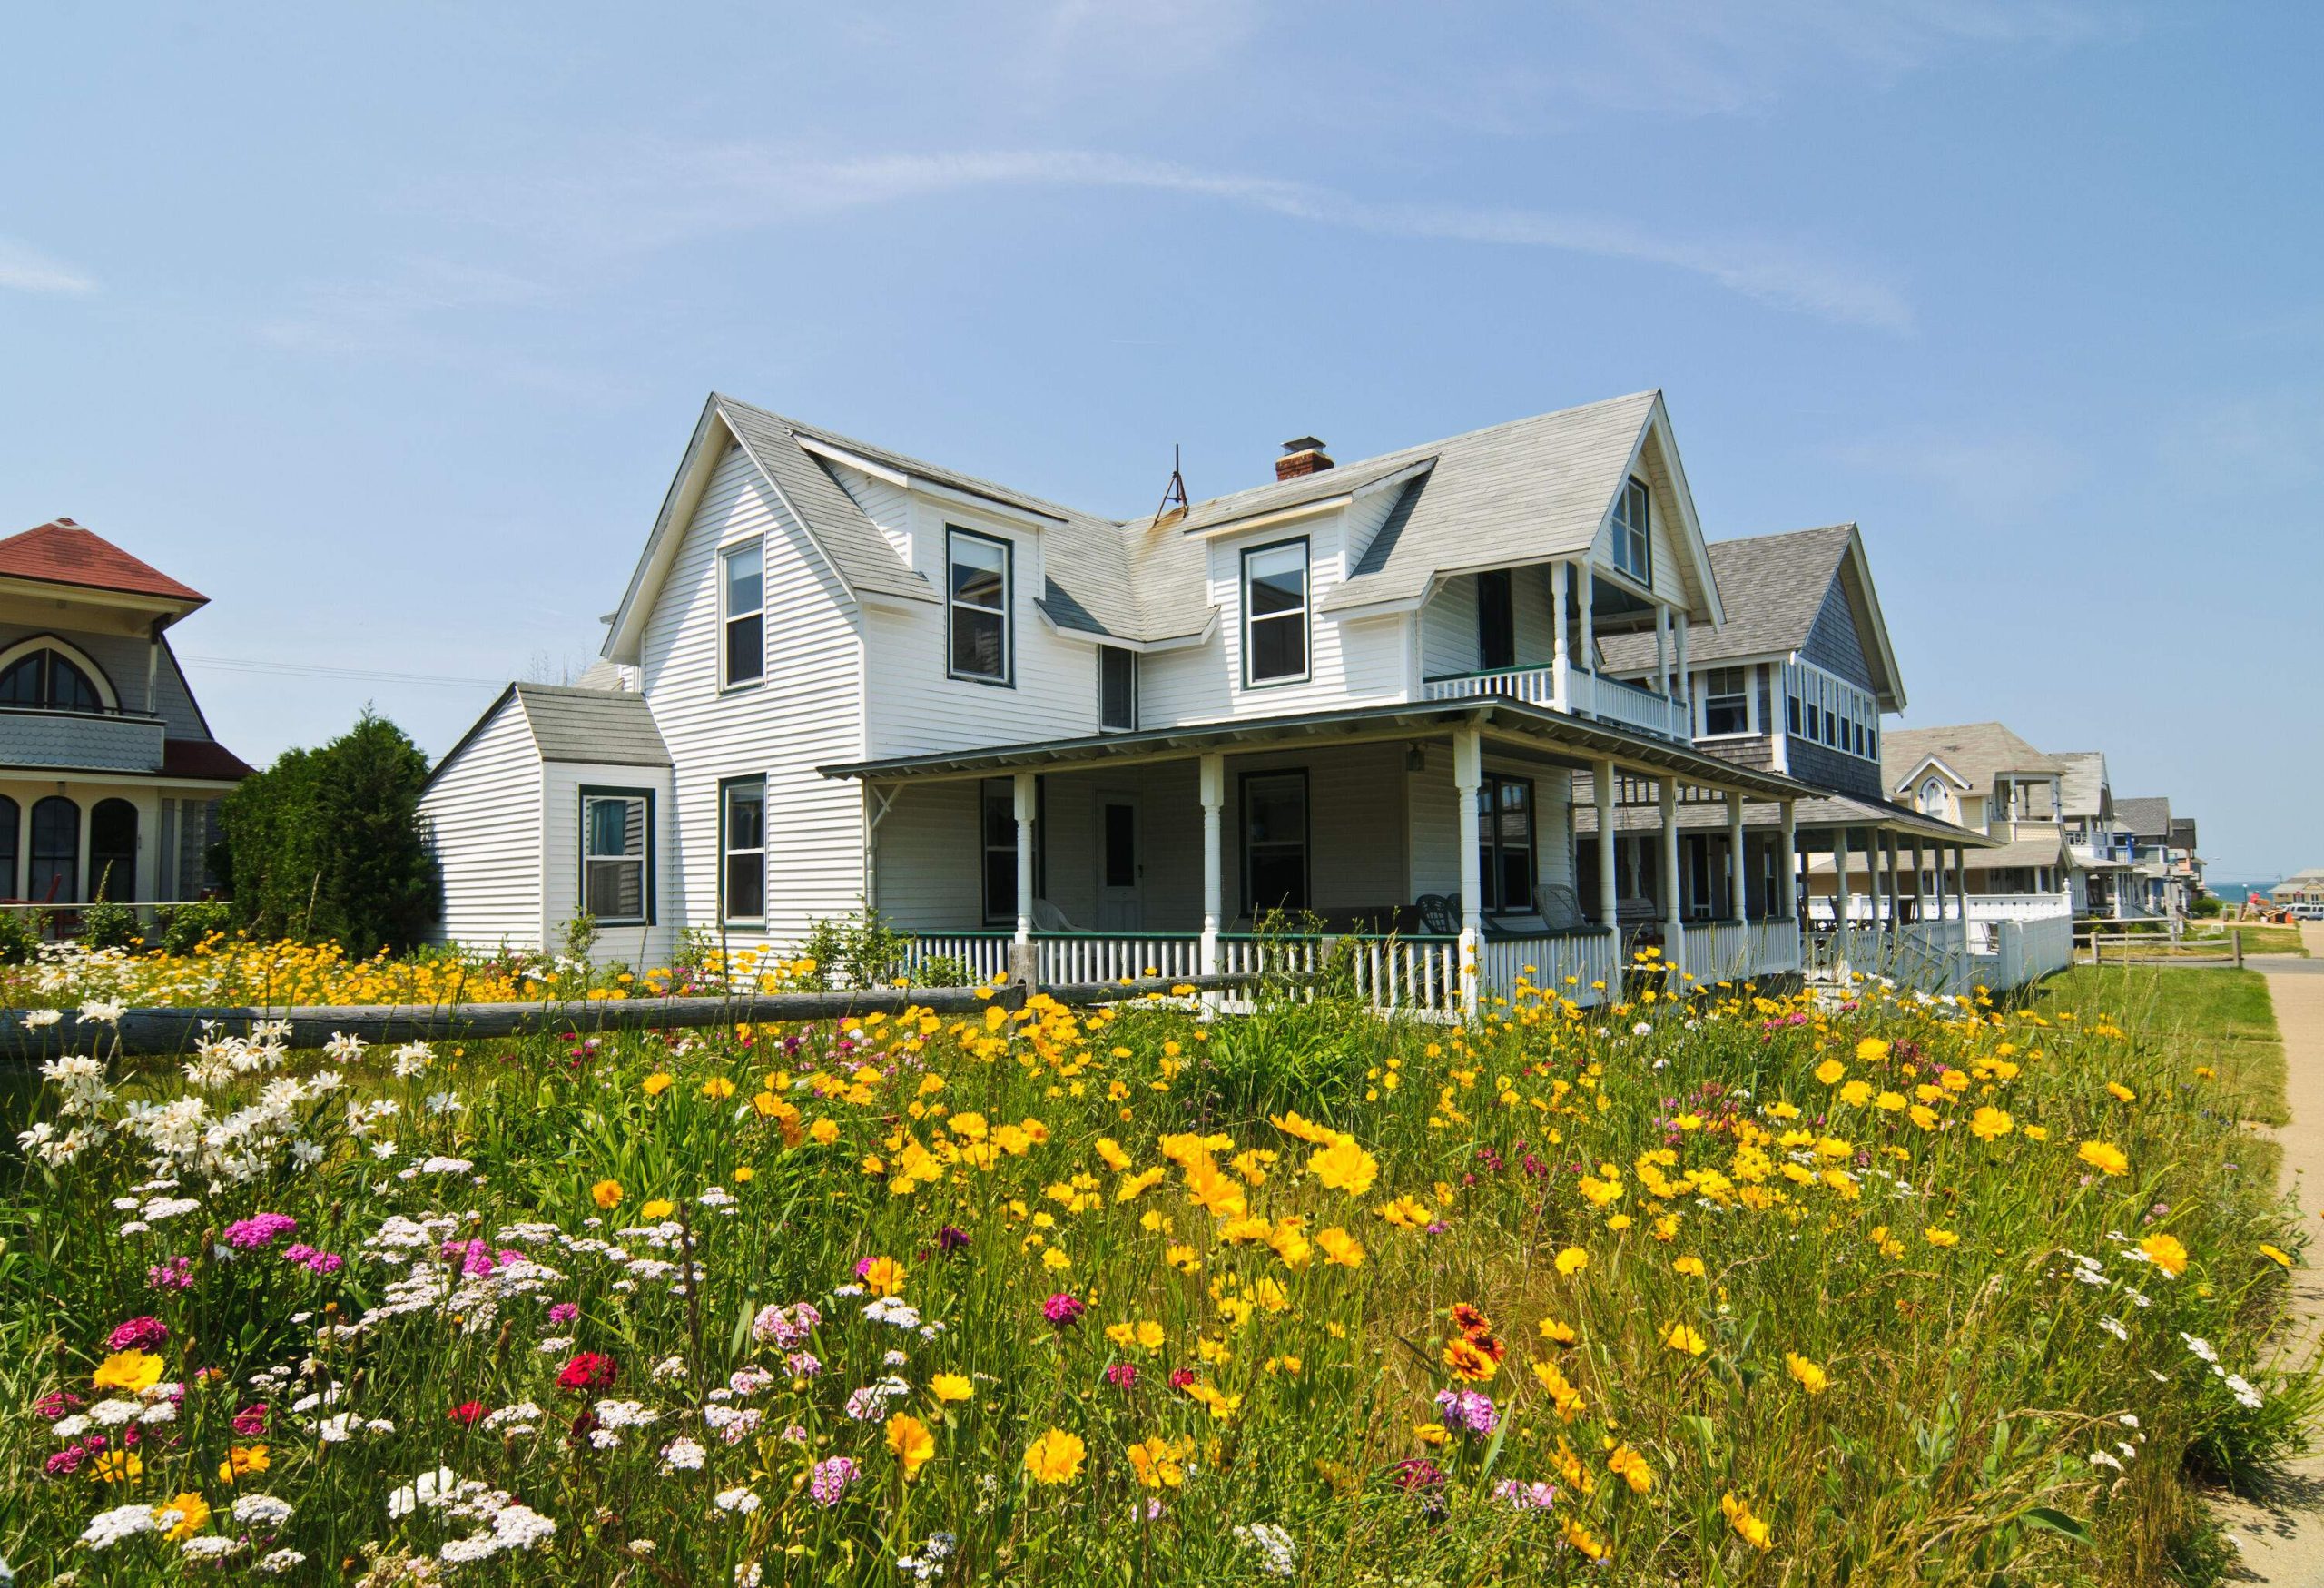 Wildflowers joyfully bloom in the yard of a quaint seaside cottage, adding a burst of vibrant colours and a touch of natural beauty to the coastal setting.